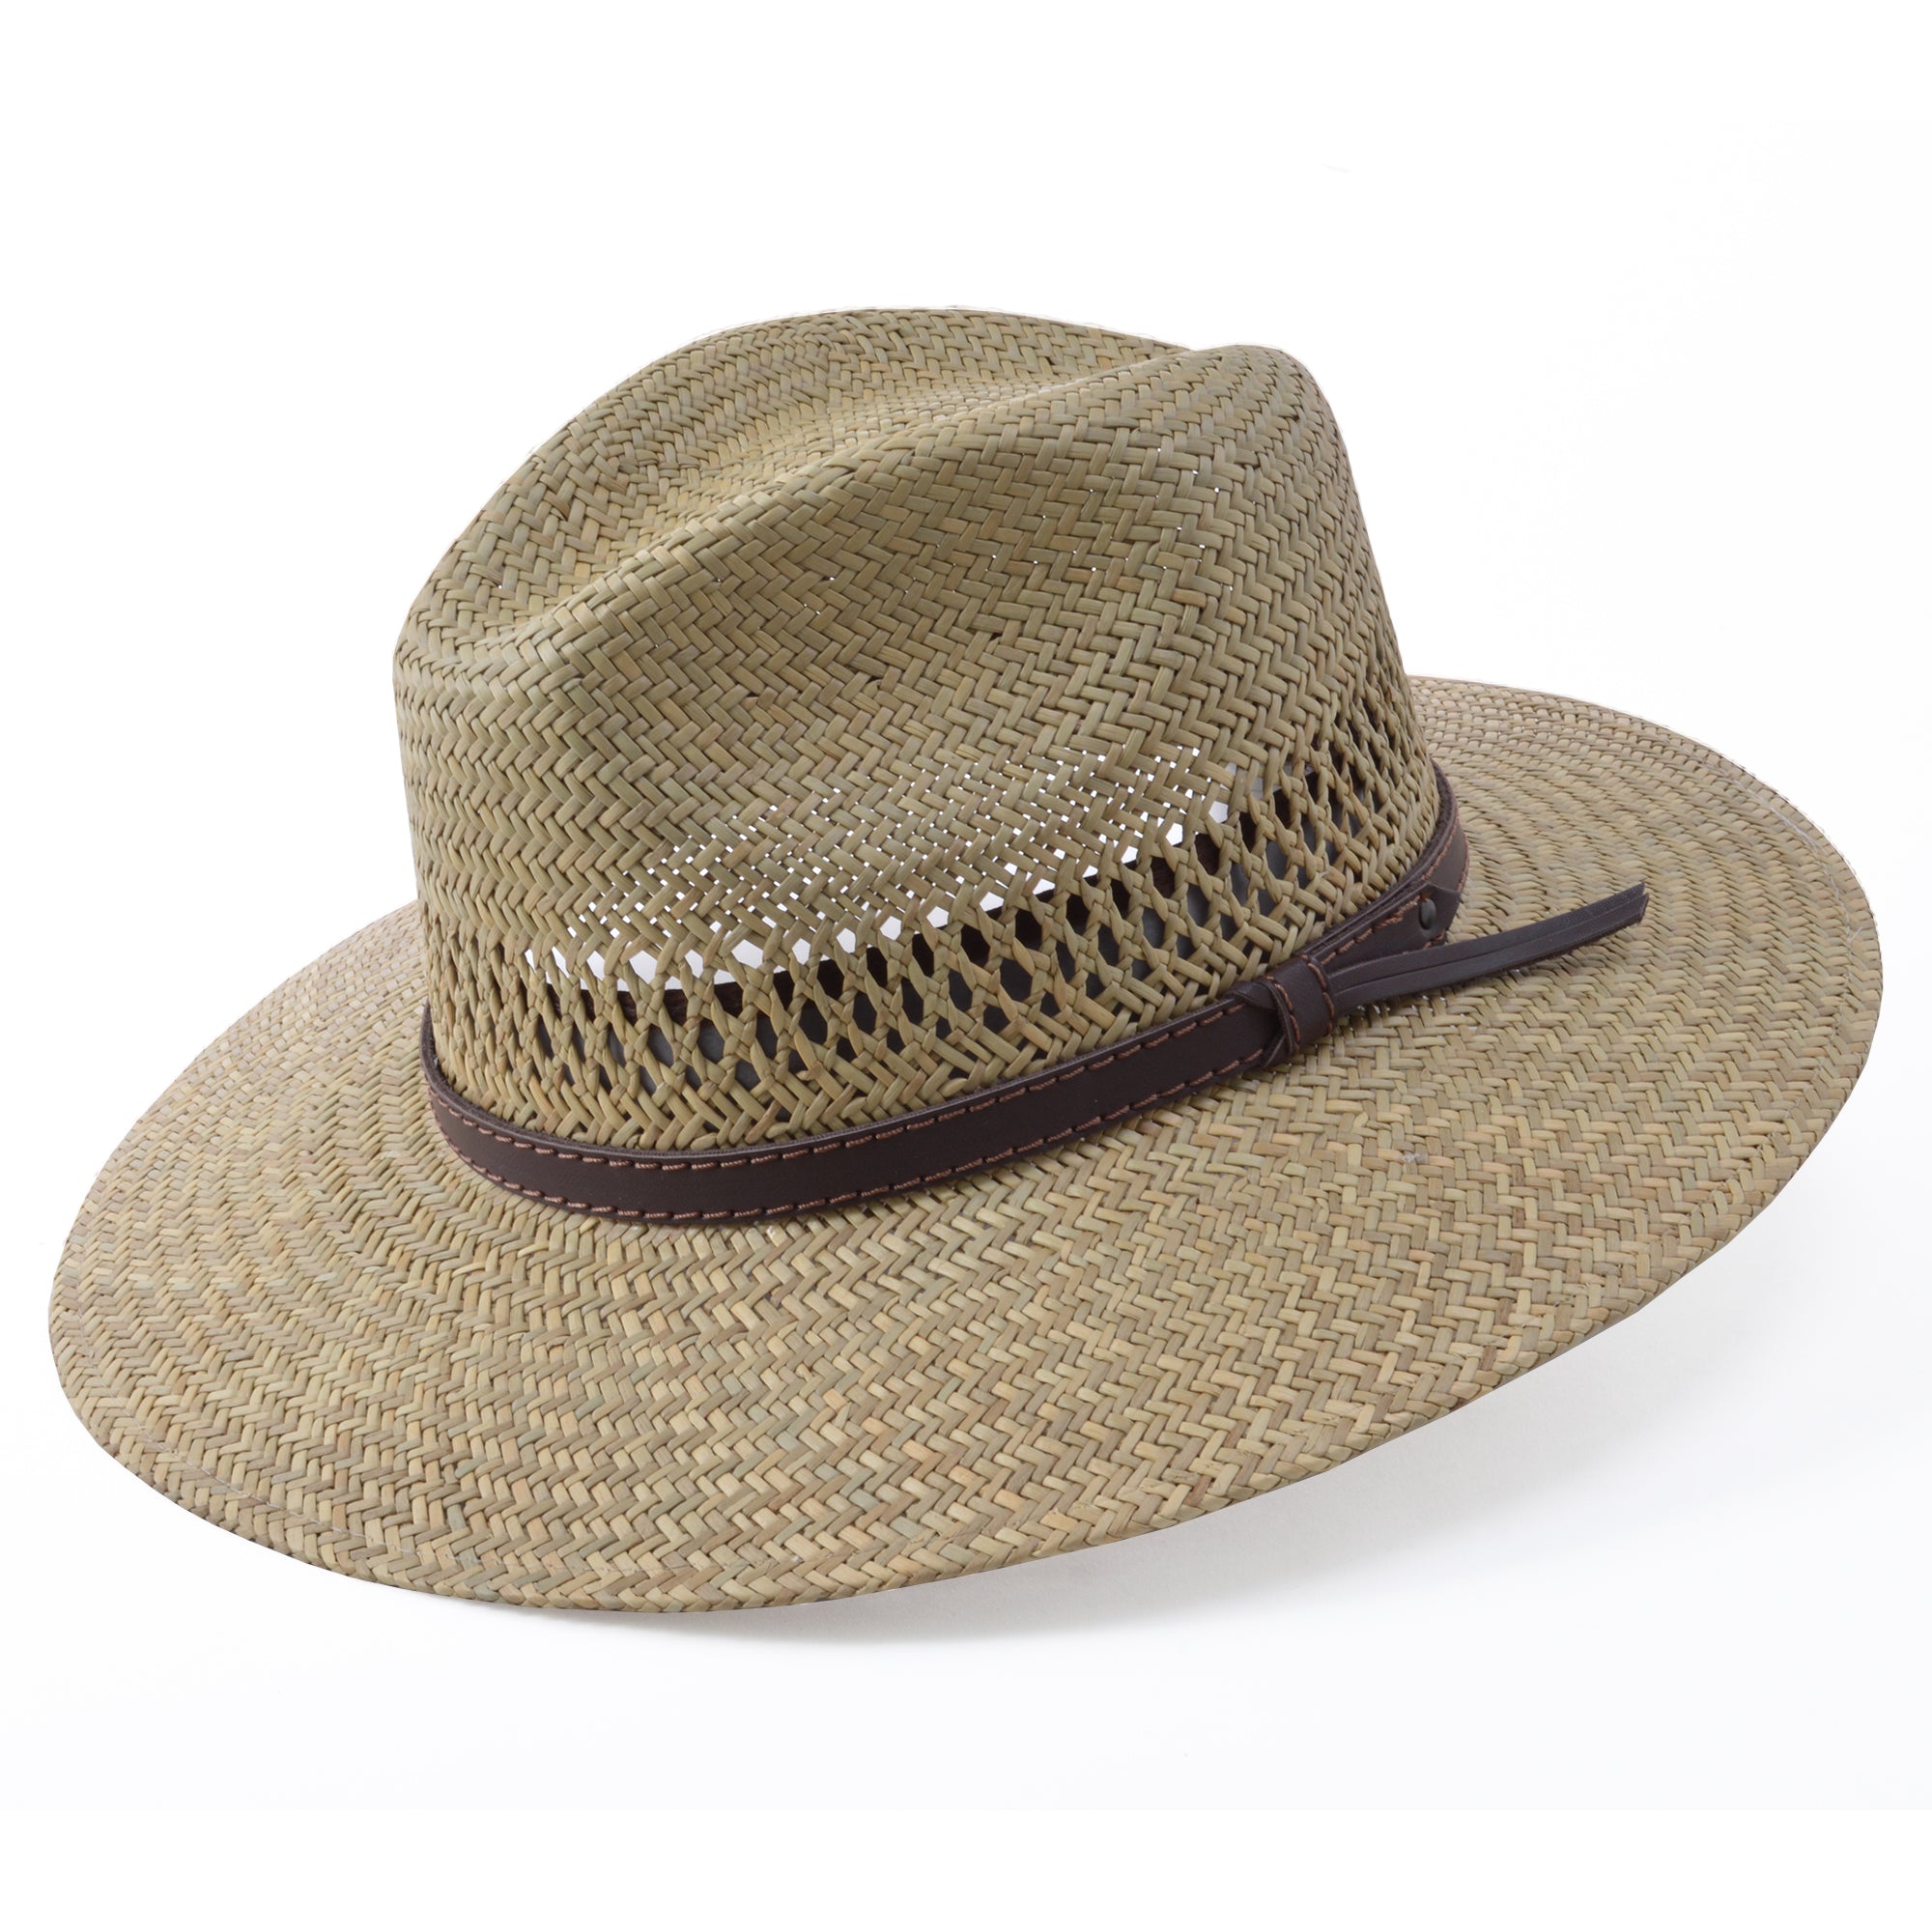 Stetson Childress Vented Seagrass Straw Hat